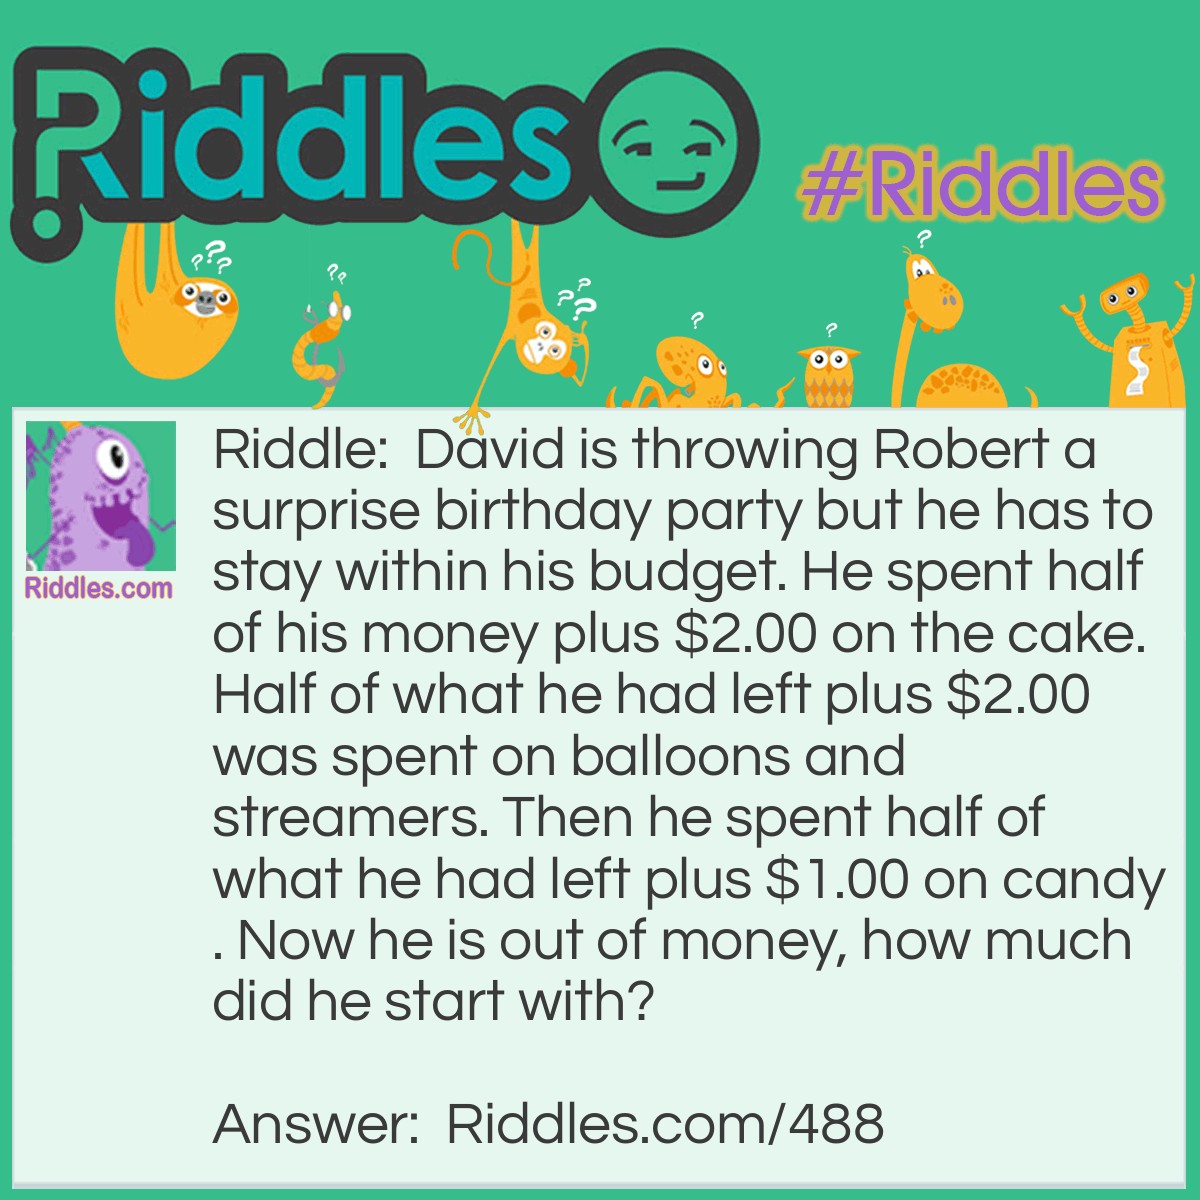 Riddle: David is throwing Robert a surprise birthday party but he has to stay within his budget. He spent half of his money plus $2.00 on the cake. Half of what he had left plus $2.00 was spent on balloons and streamers. Then he spent half of what he had left plus $1.00 on candy. Now he is out of money, how much did he start with? Answer: This one is best solved working backwards, the last part David spent half of what was left plus $1.00 on candy and then was out of money. That means he must have spent $2.00 on Candy as $1.00 was half of what he had using the same logic backwards: $2.00 on candy $6.00 on Balloons and Streamers $12.00 on the cake Total of $20.00.